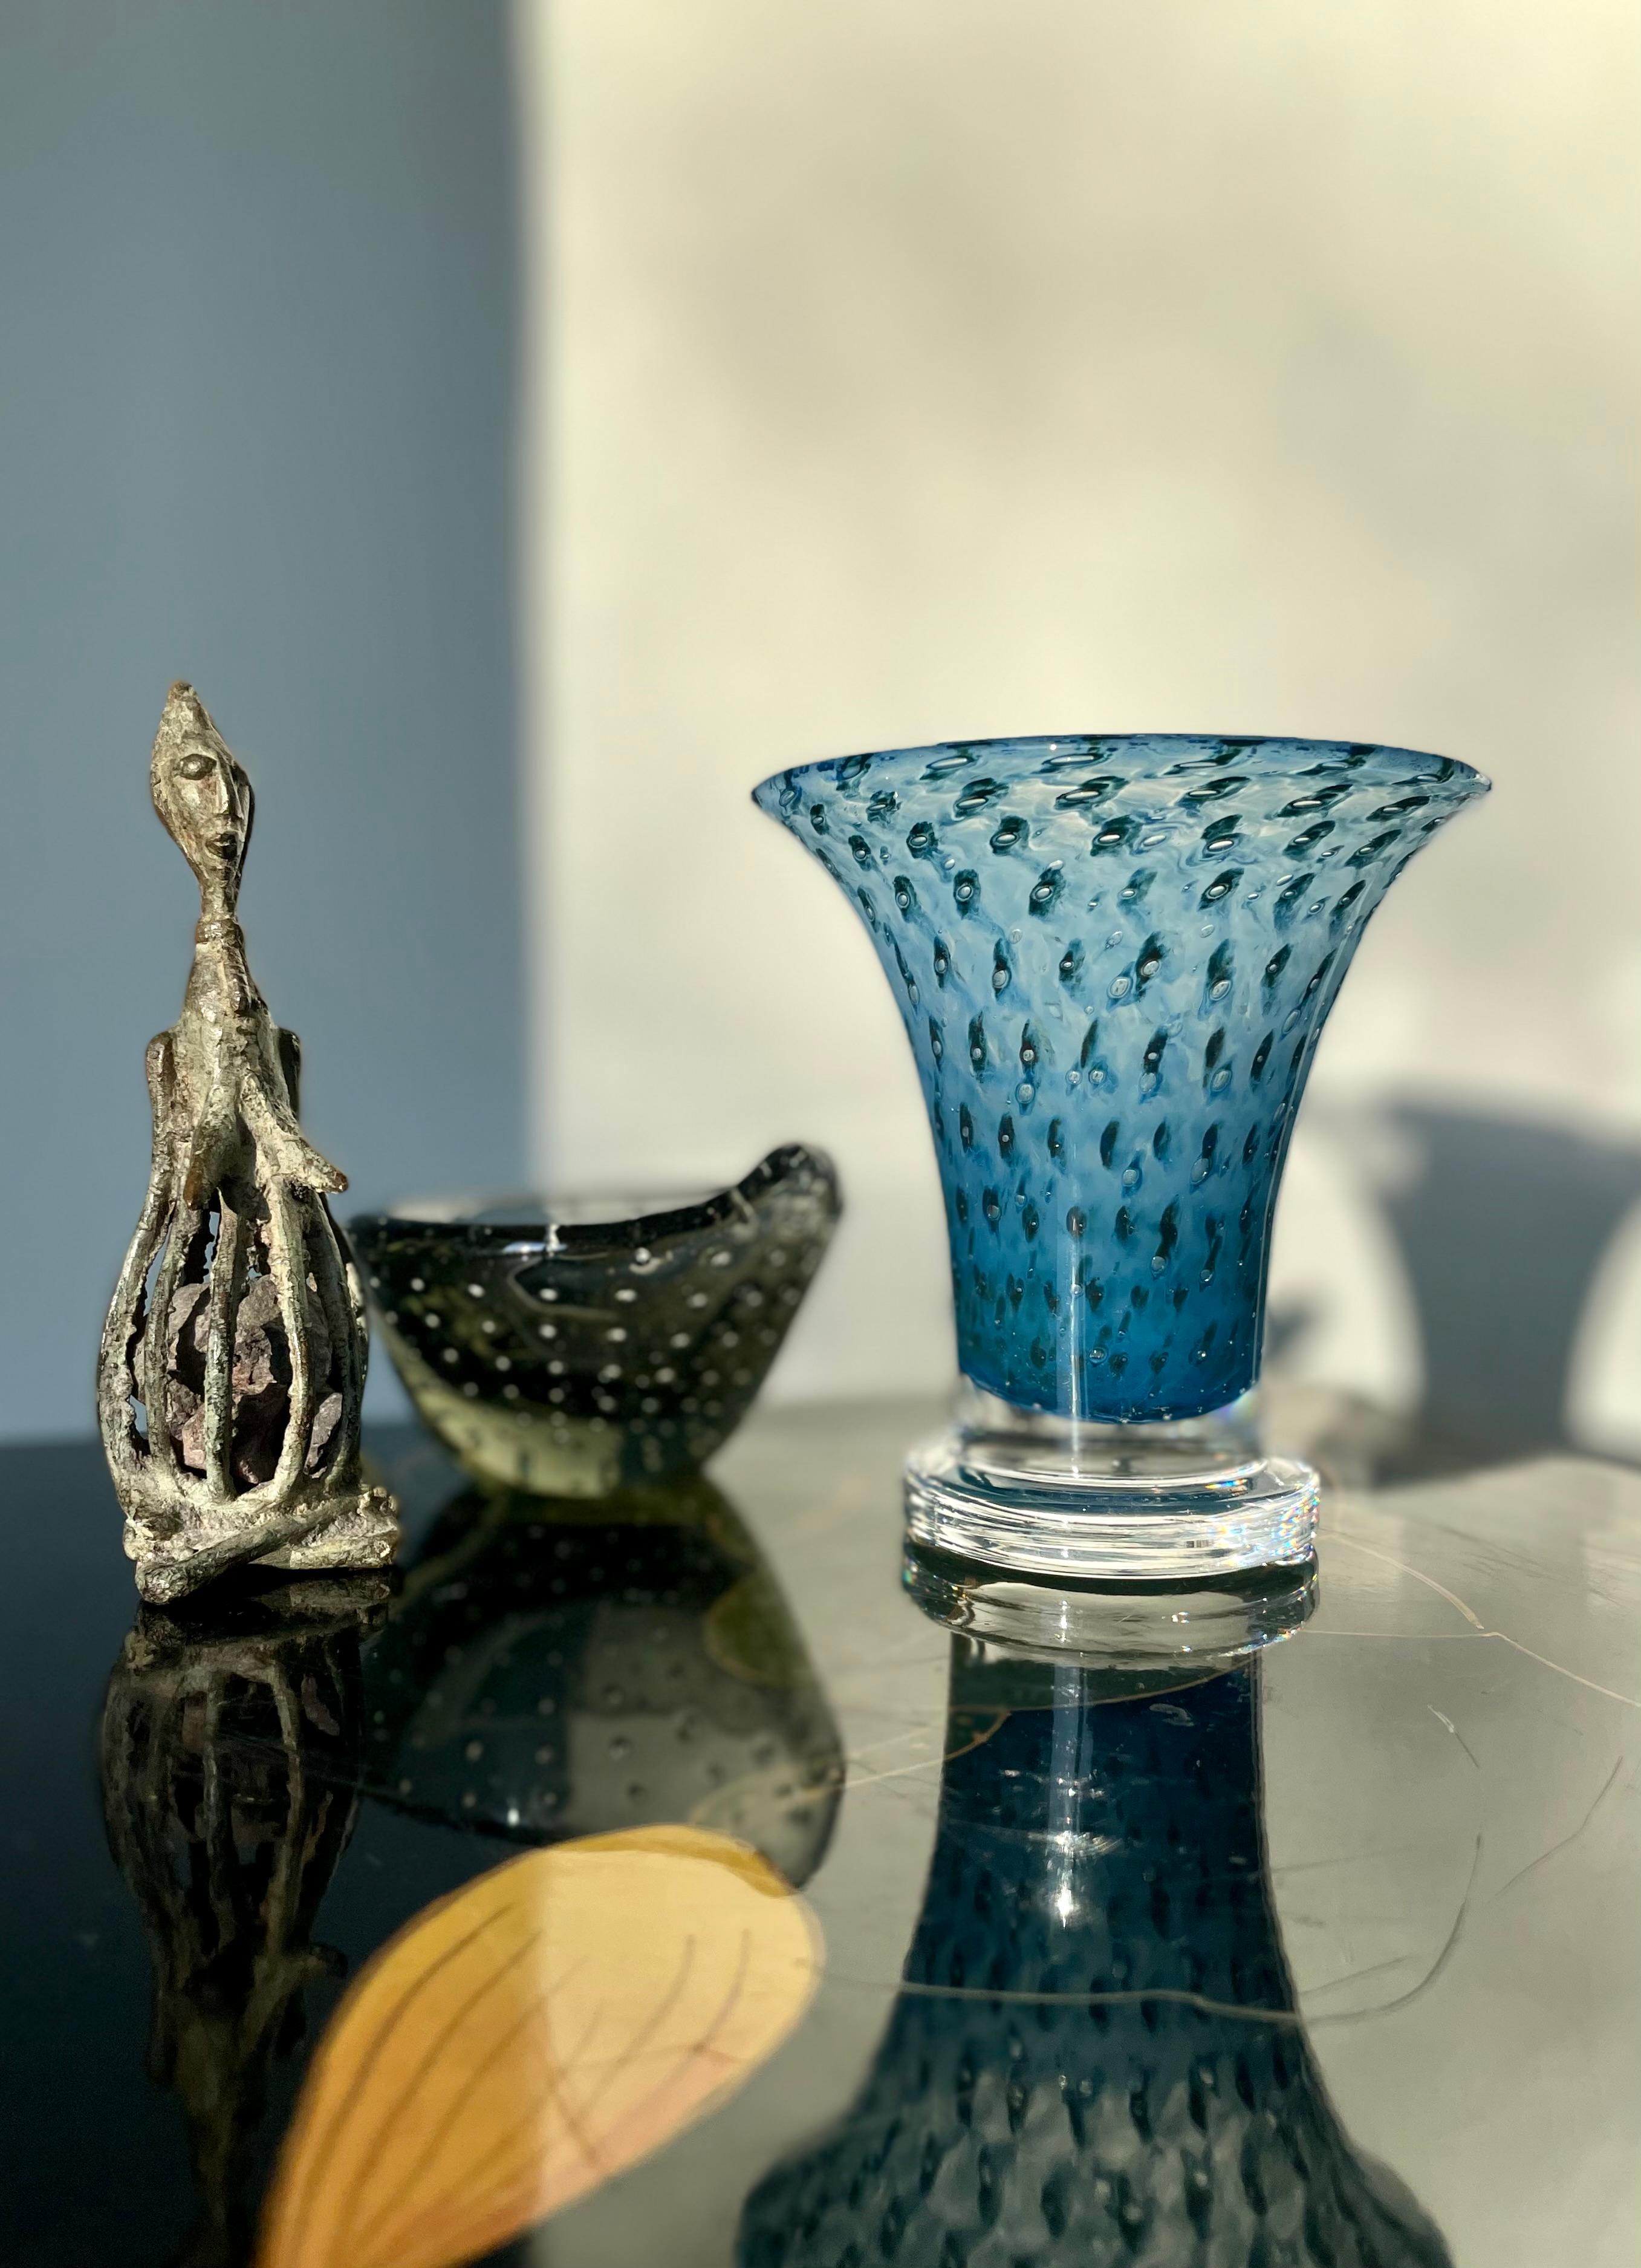 Striking blue, mouthblown controlled bubble art glass vase with decorative black eyes with clear middle resembling the eyes on peacock feathers. Designed and handmade by acclaimed Swedish art glass designer Bertil Vallien for Kosta Boda in the